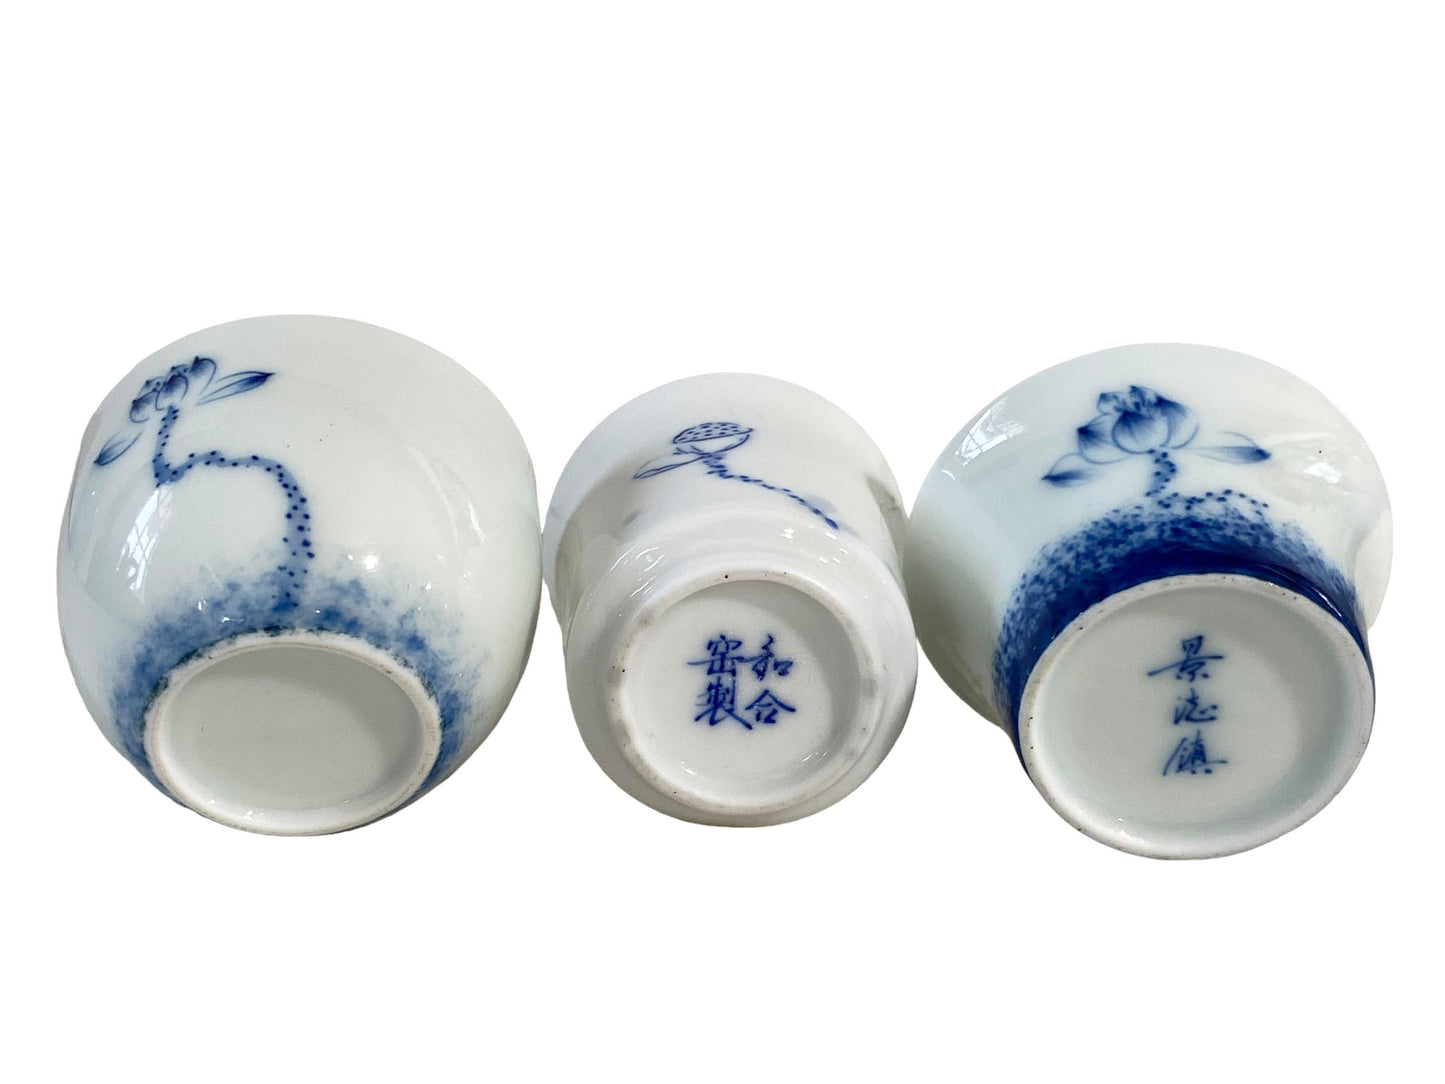 #5630 Chinoiserie Blue and White Tea Cups - Set of 3